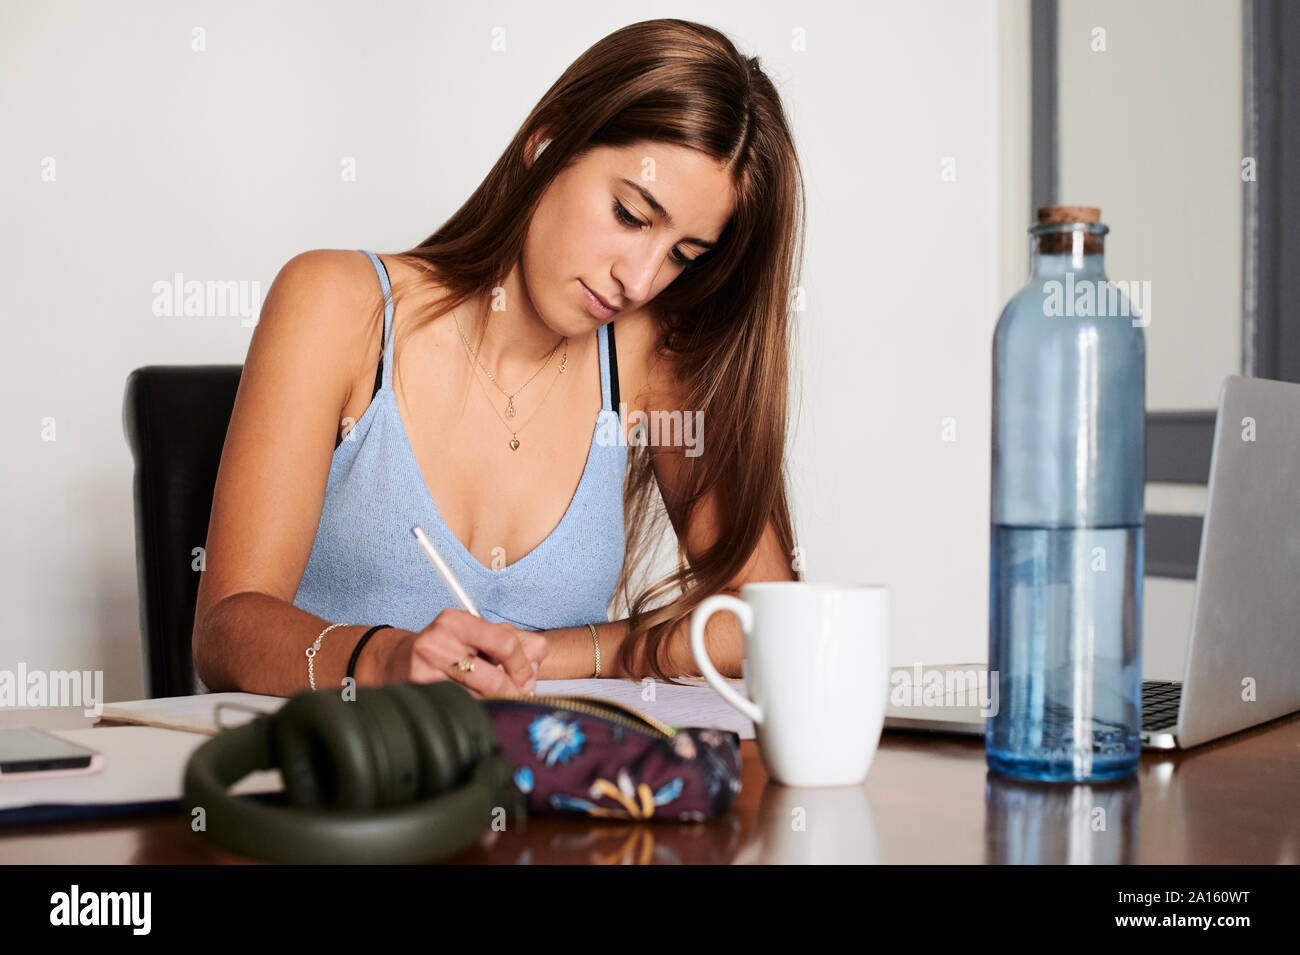 Female student studying at home, using laptop Banque D'Images